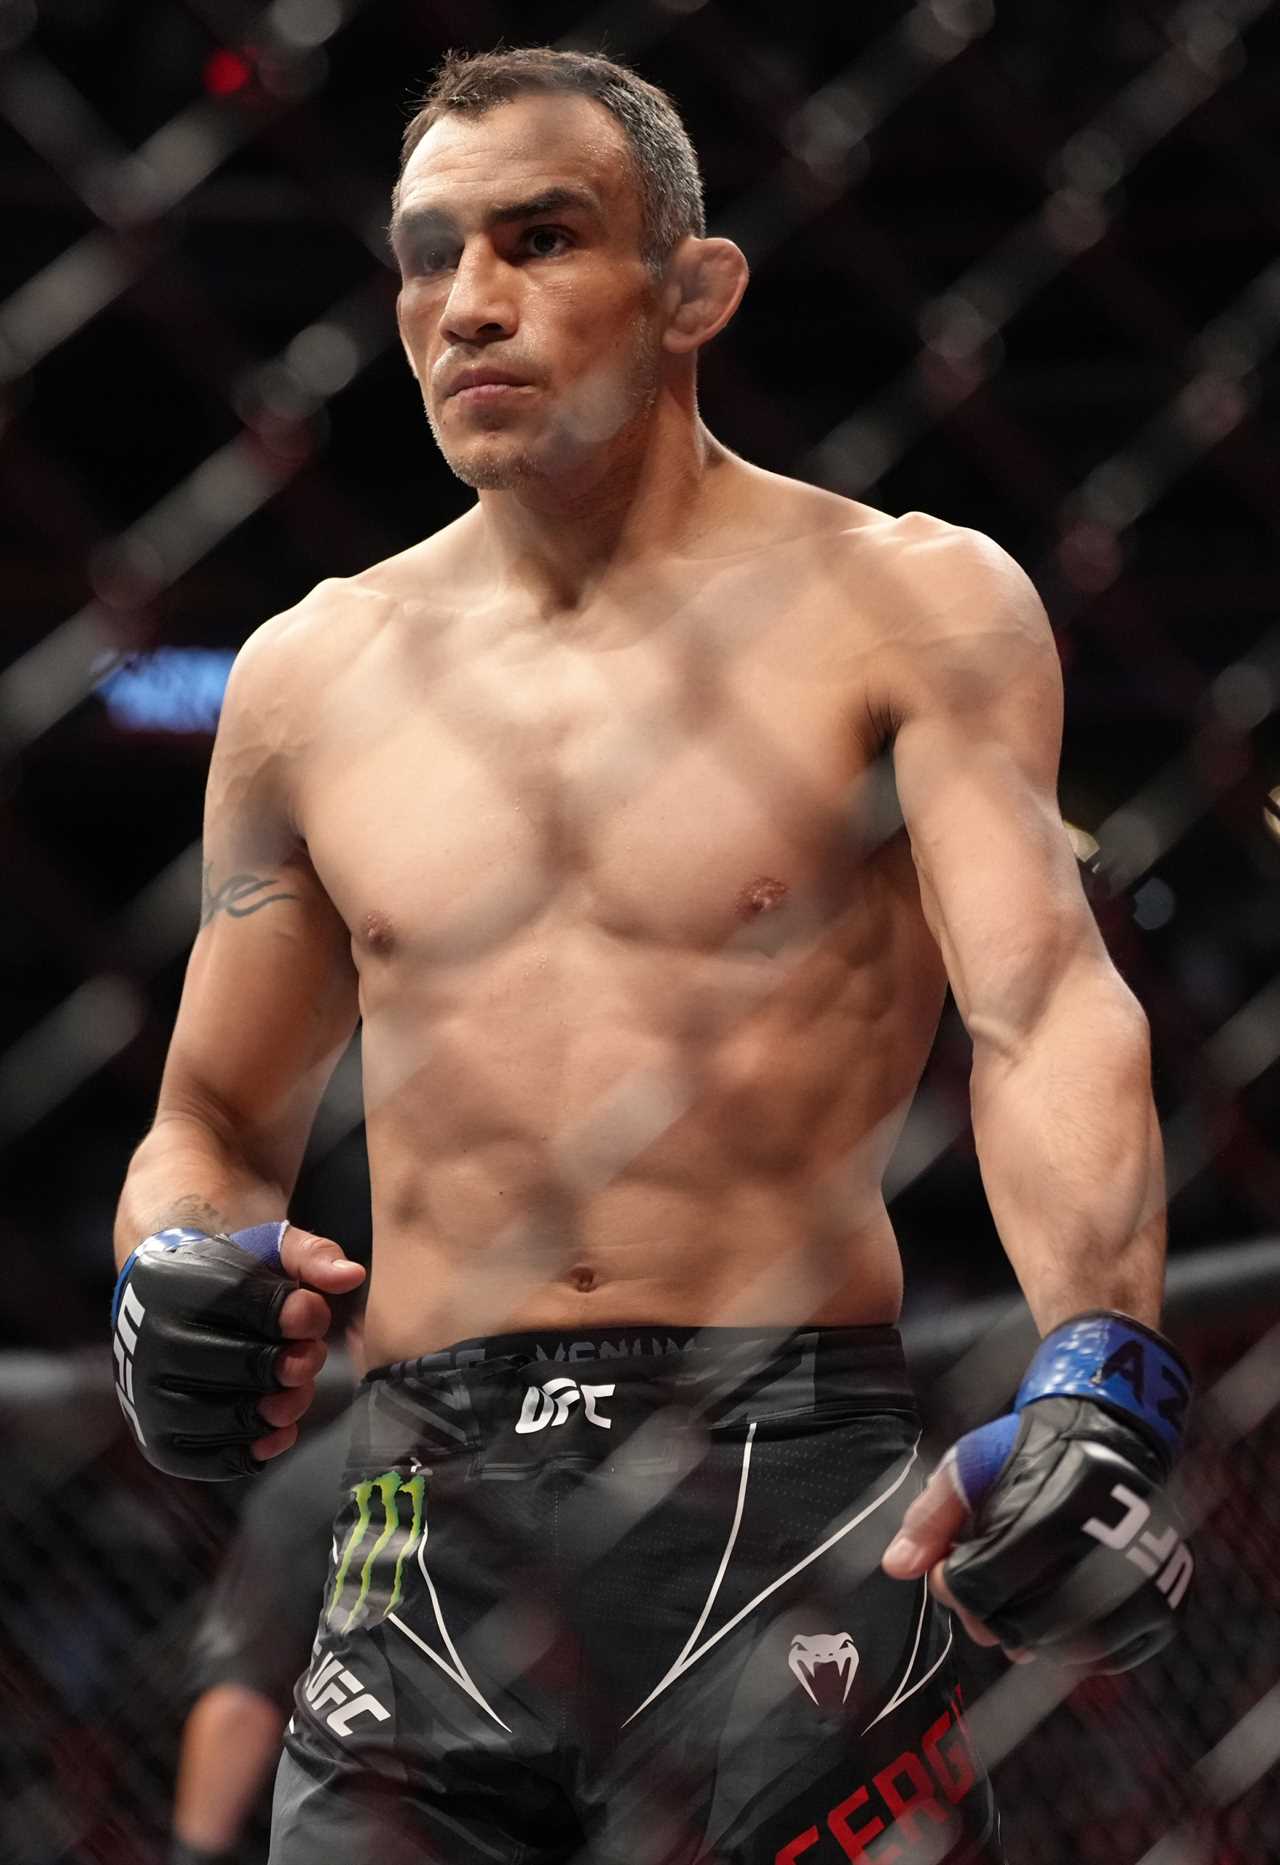 Tony Ferguson breaks his silence after being released from the hospital following a terrible KO loss to Michael Chandler in UFC 274